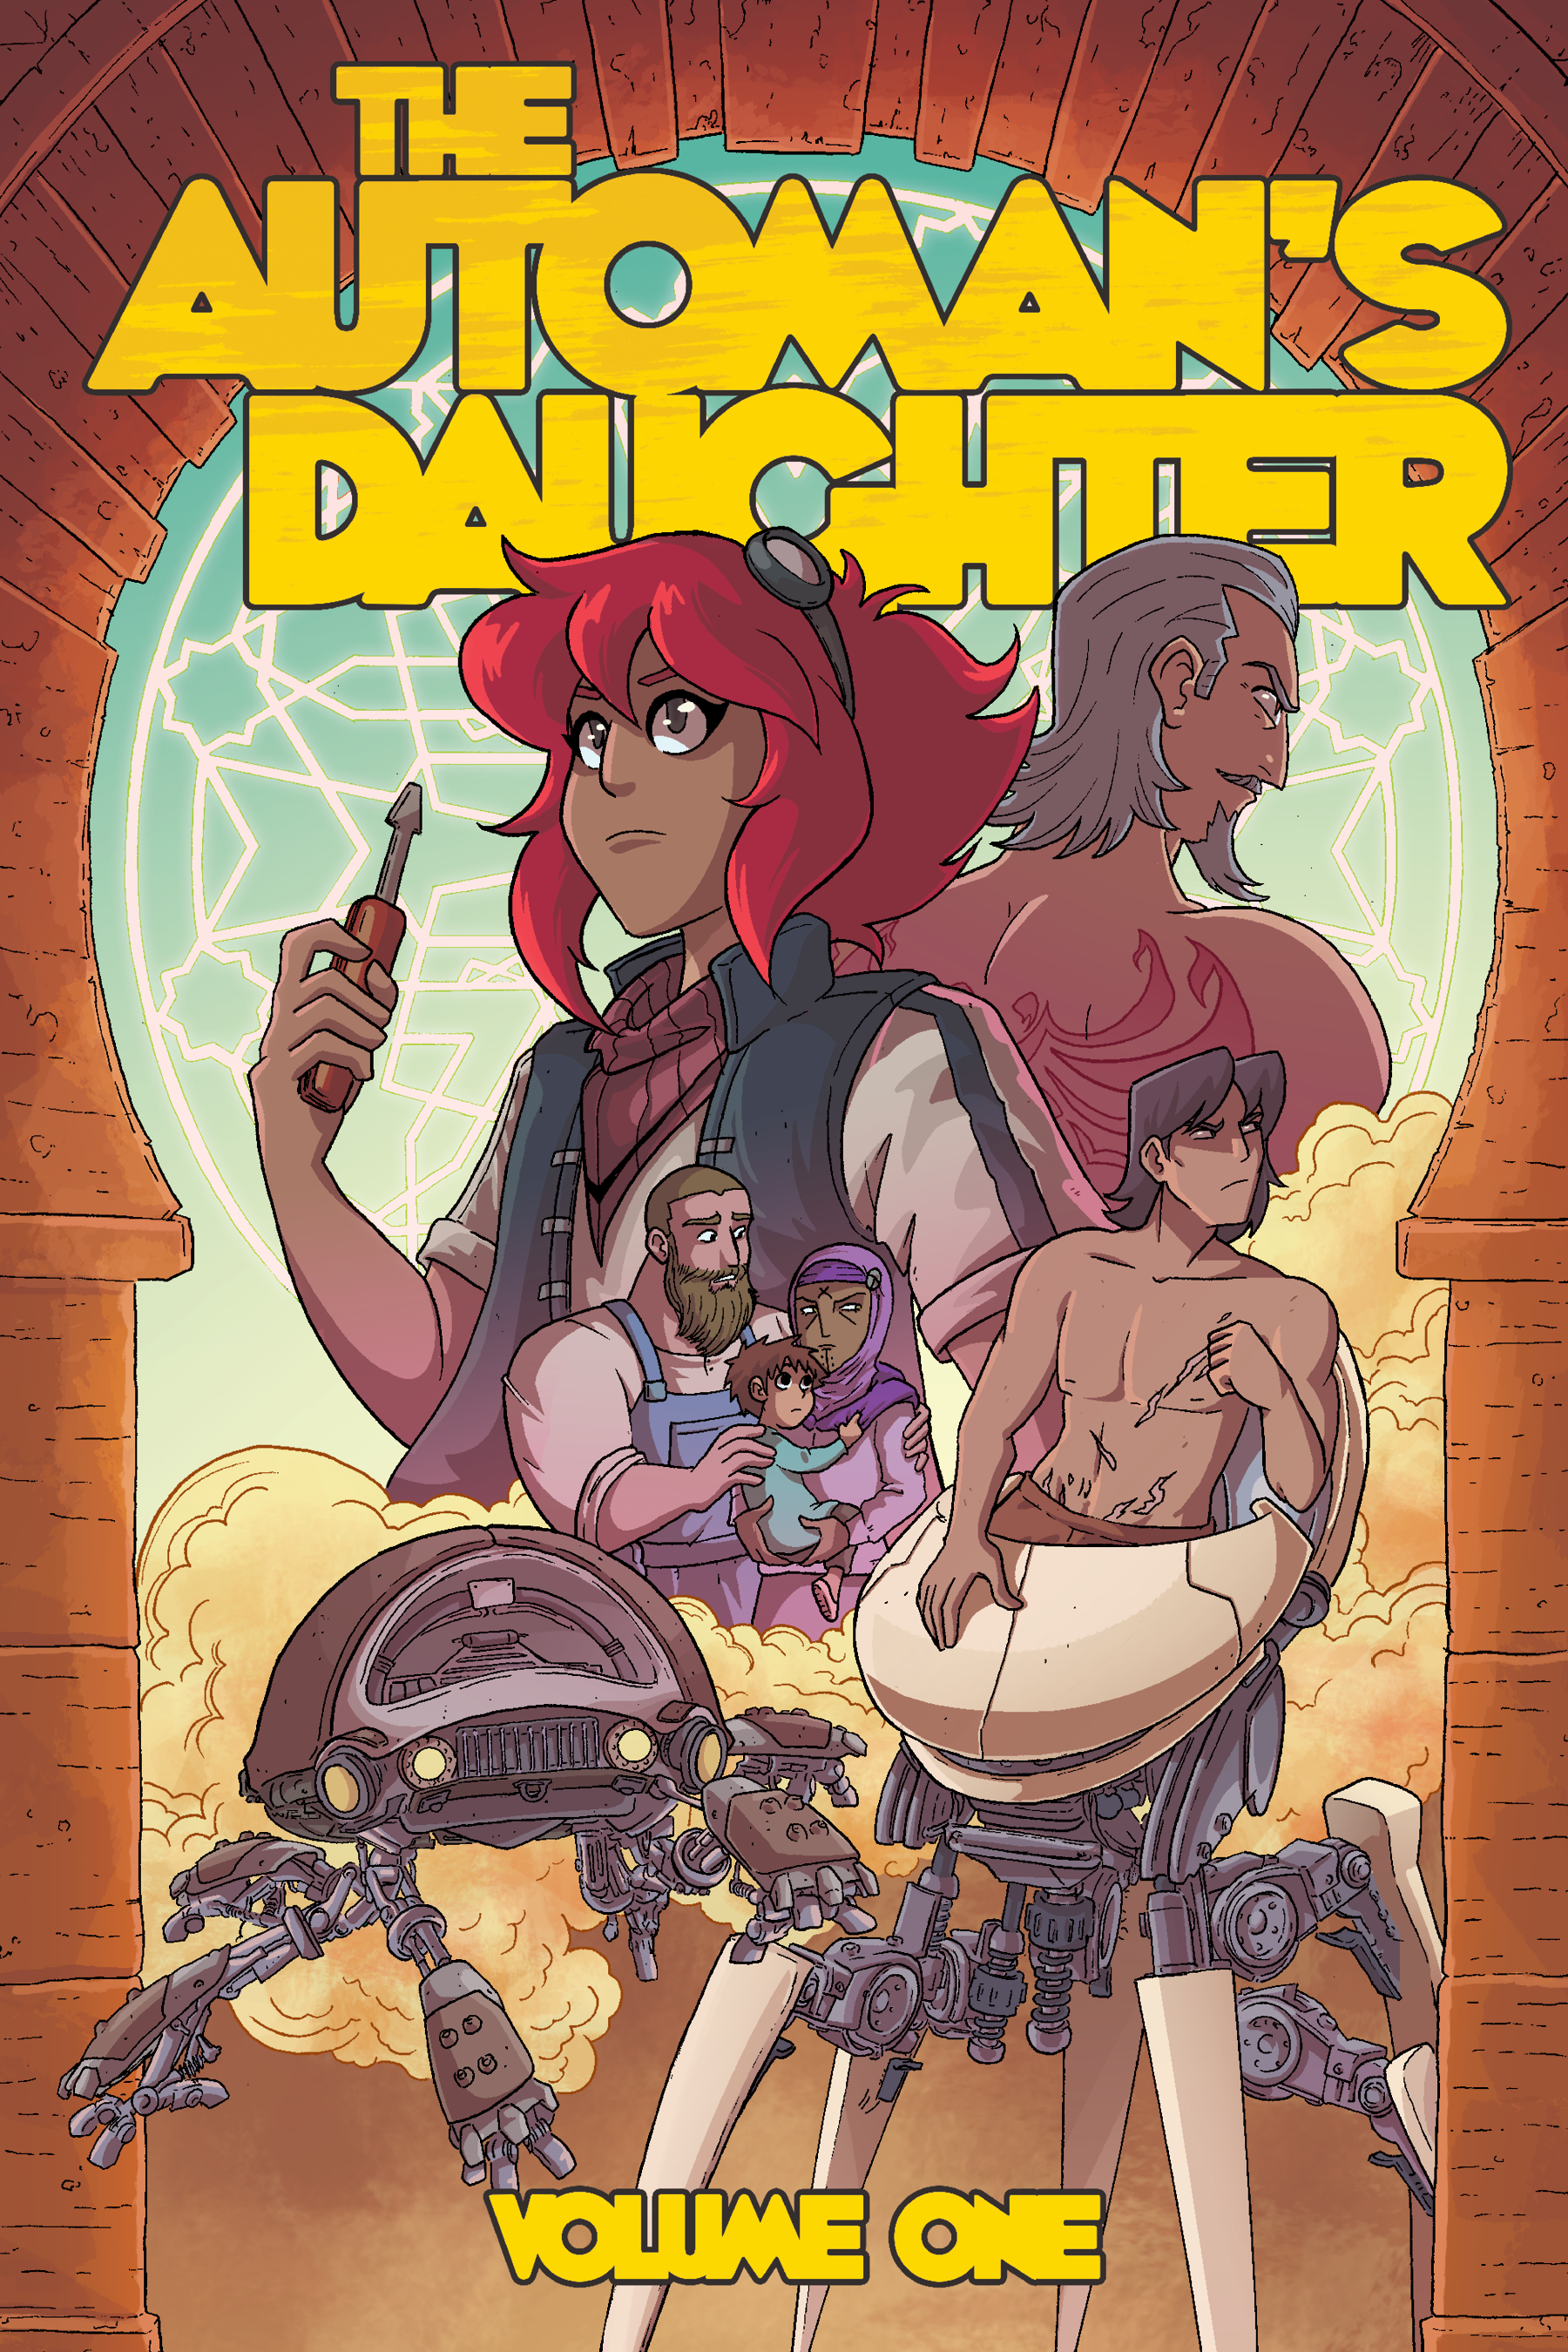 The Automan's Daughter: Volume 1 from The Automan's Daughter - Webcomic Merchandise 